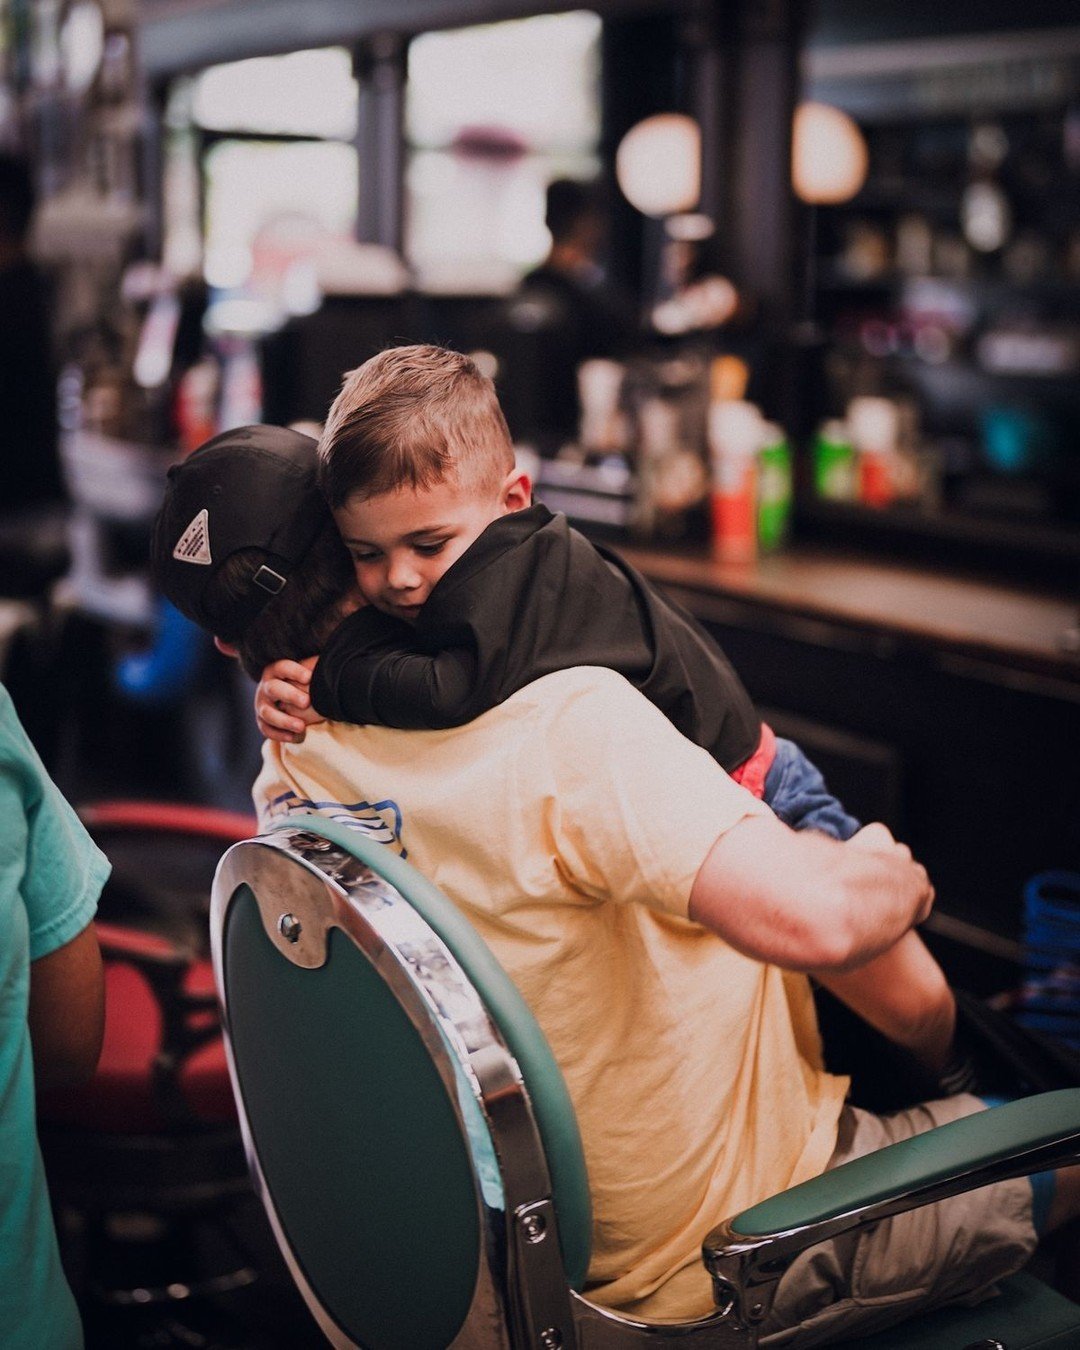 Capturing heartwarming moments at Chop Barbershop! 💈✨ Witnessing genuine connections like these reminds us why we love what we do. Cherishing these special moments that make our shop feel like family. #ChopBarbershop #BarberLife #HeartwarmingMoments